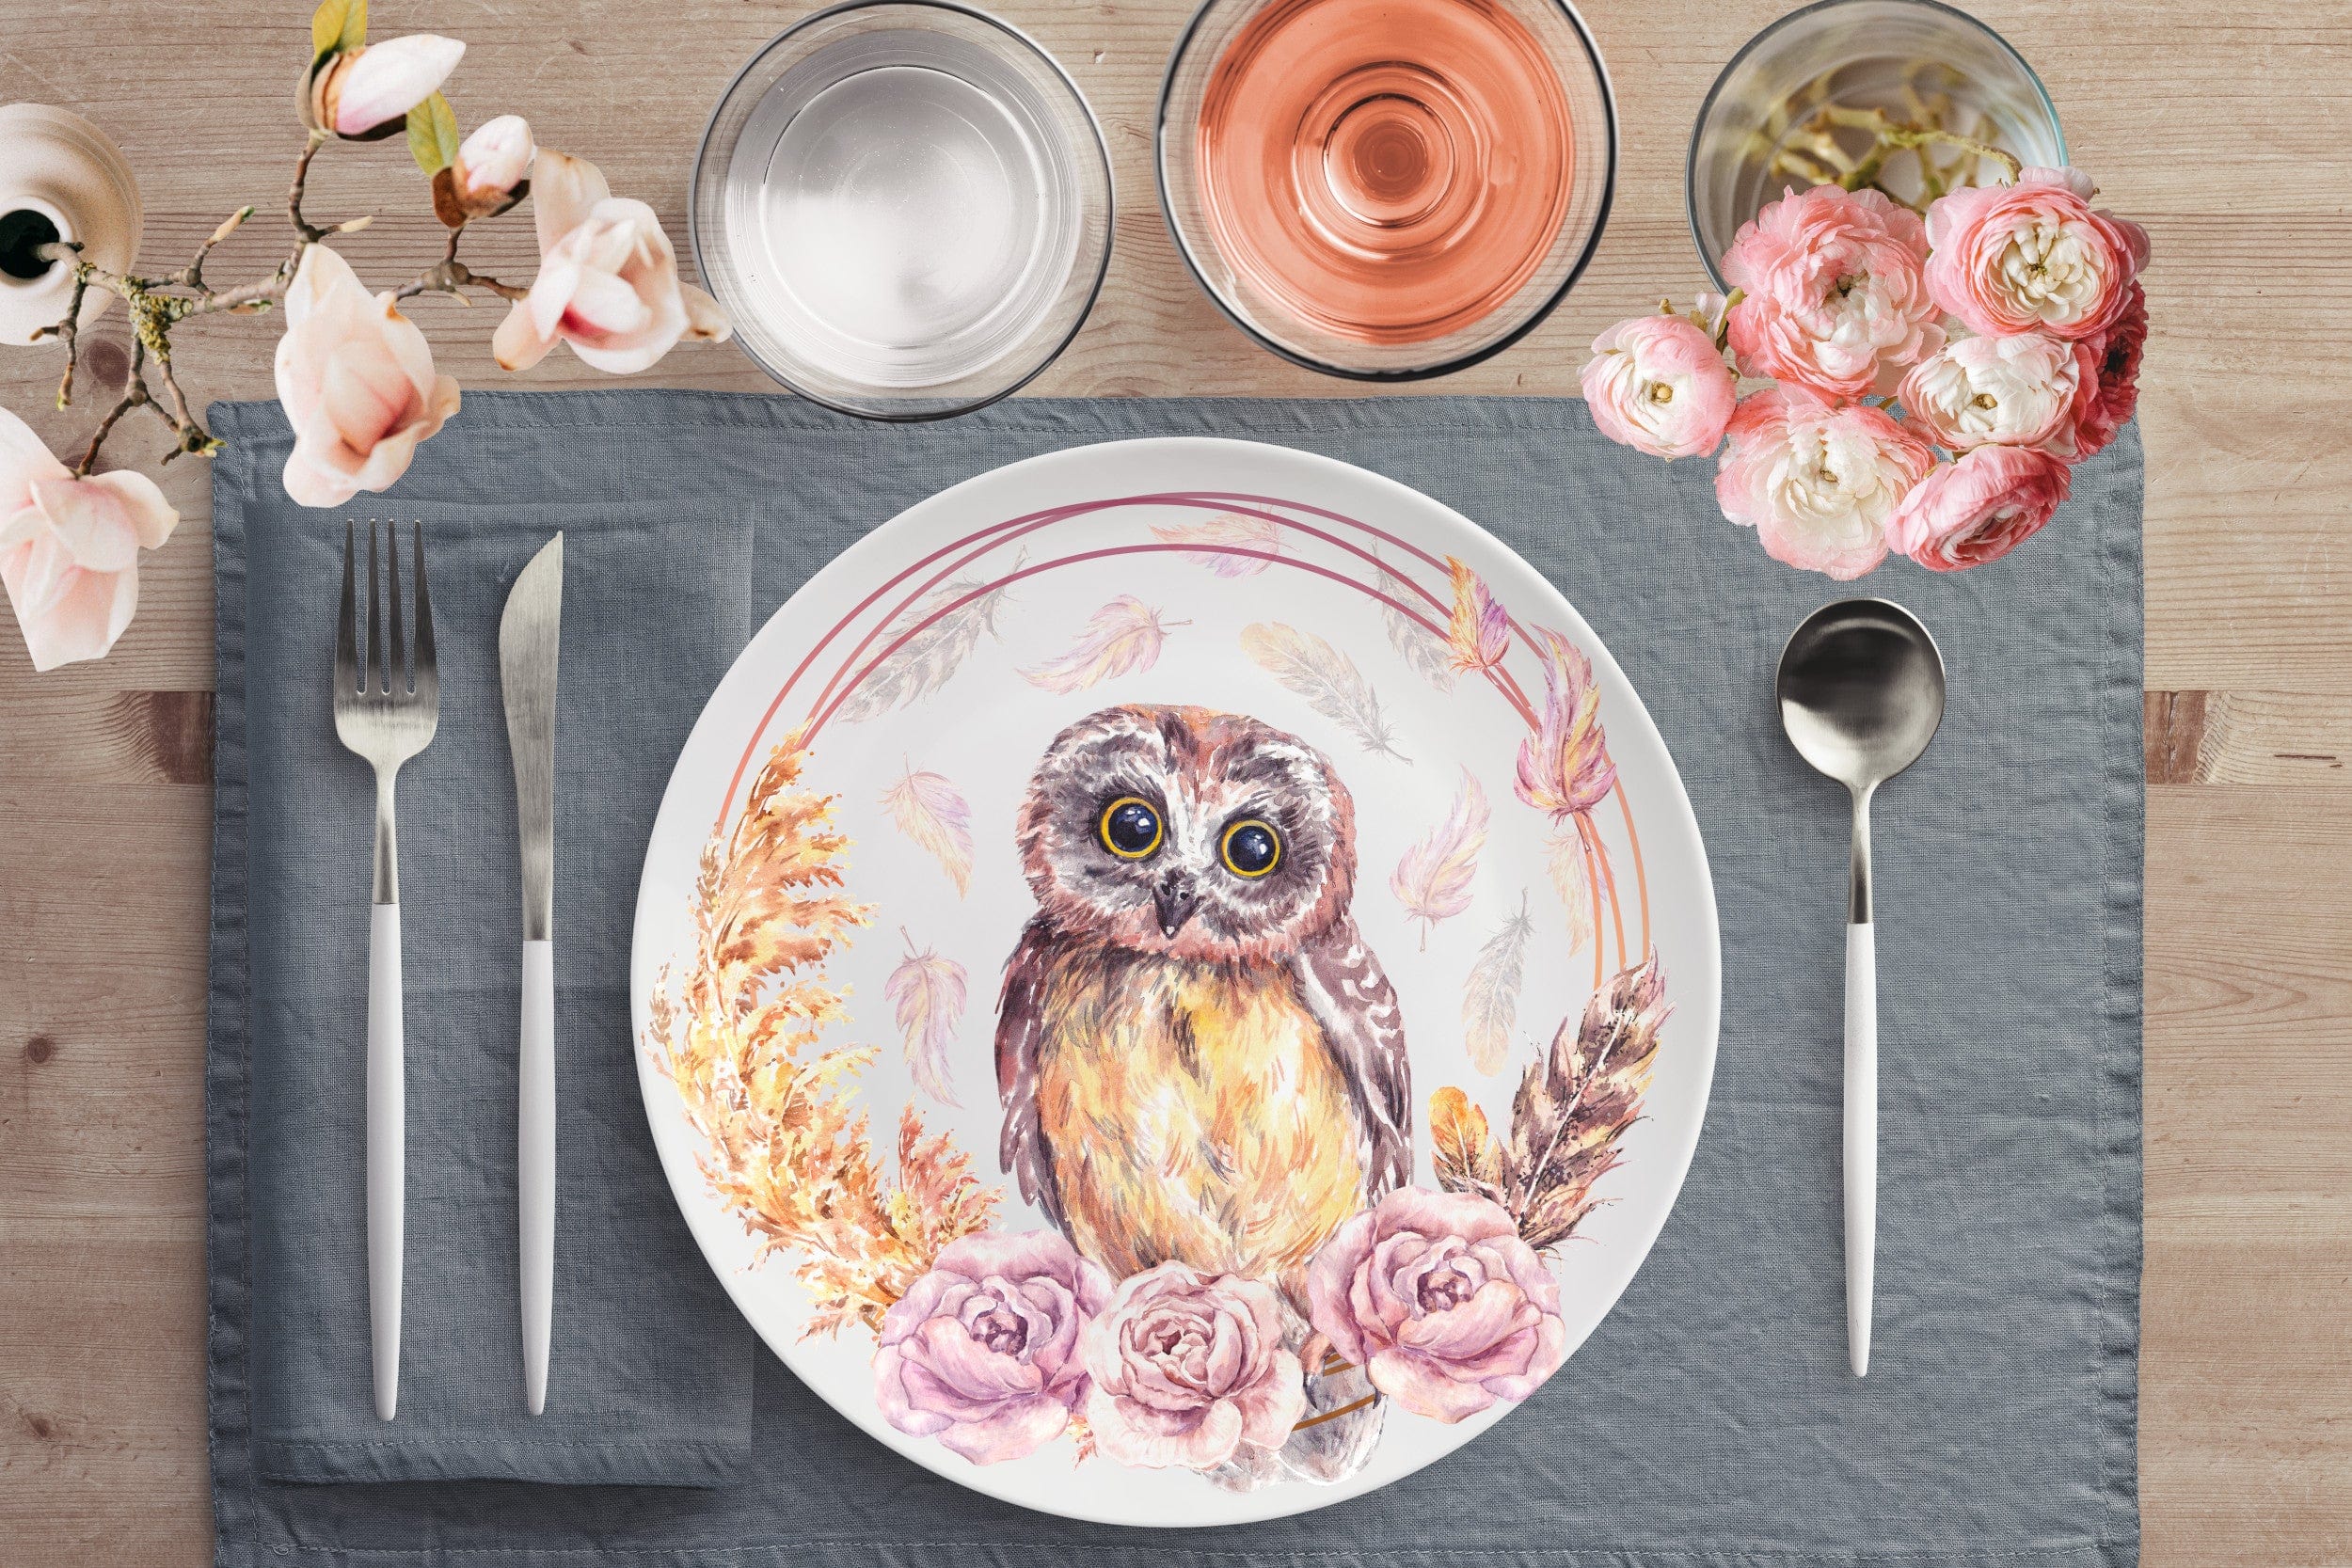 Kate McEnroe New York Dinner Plate in Boho Florals and Owl Plates Single 9820SINGLE